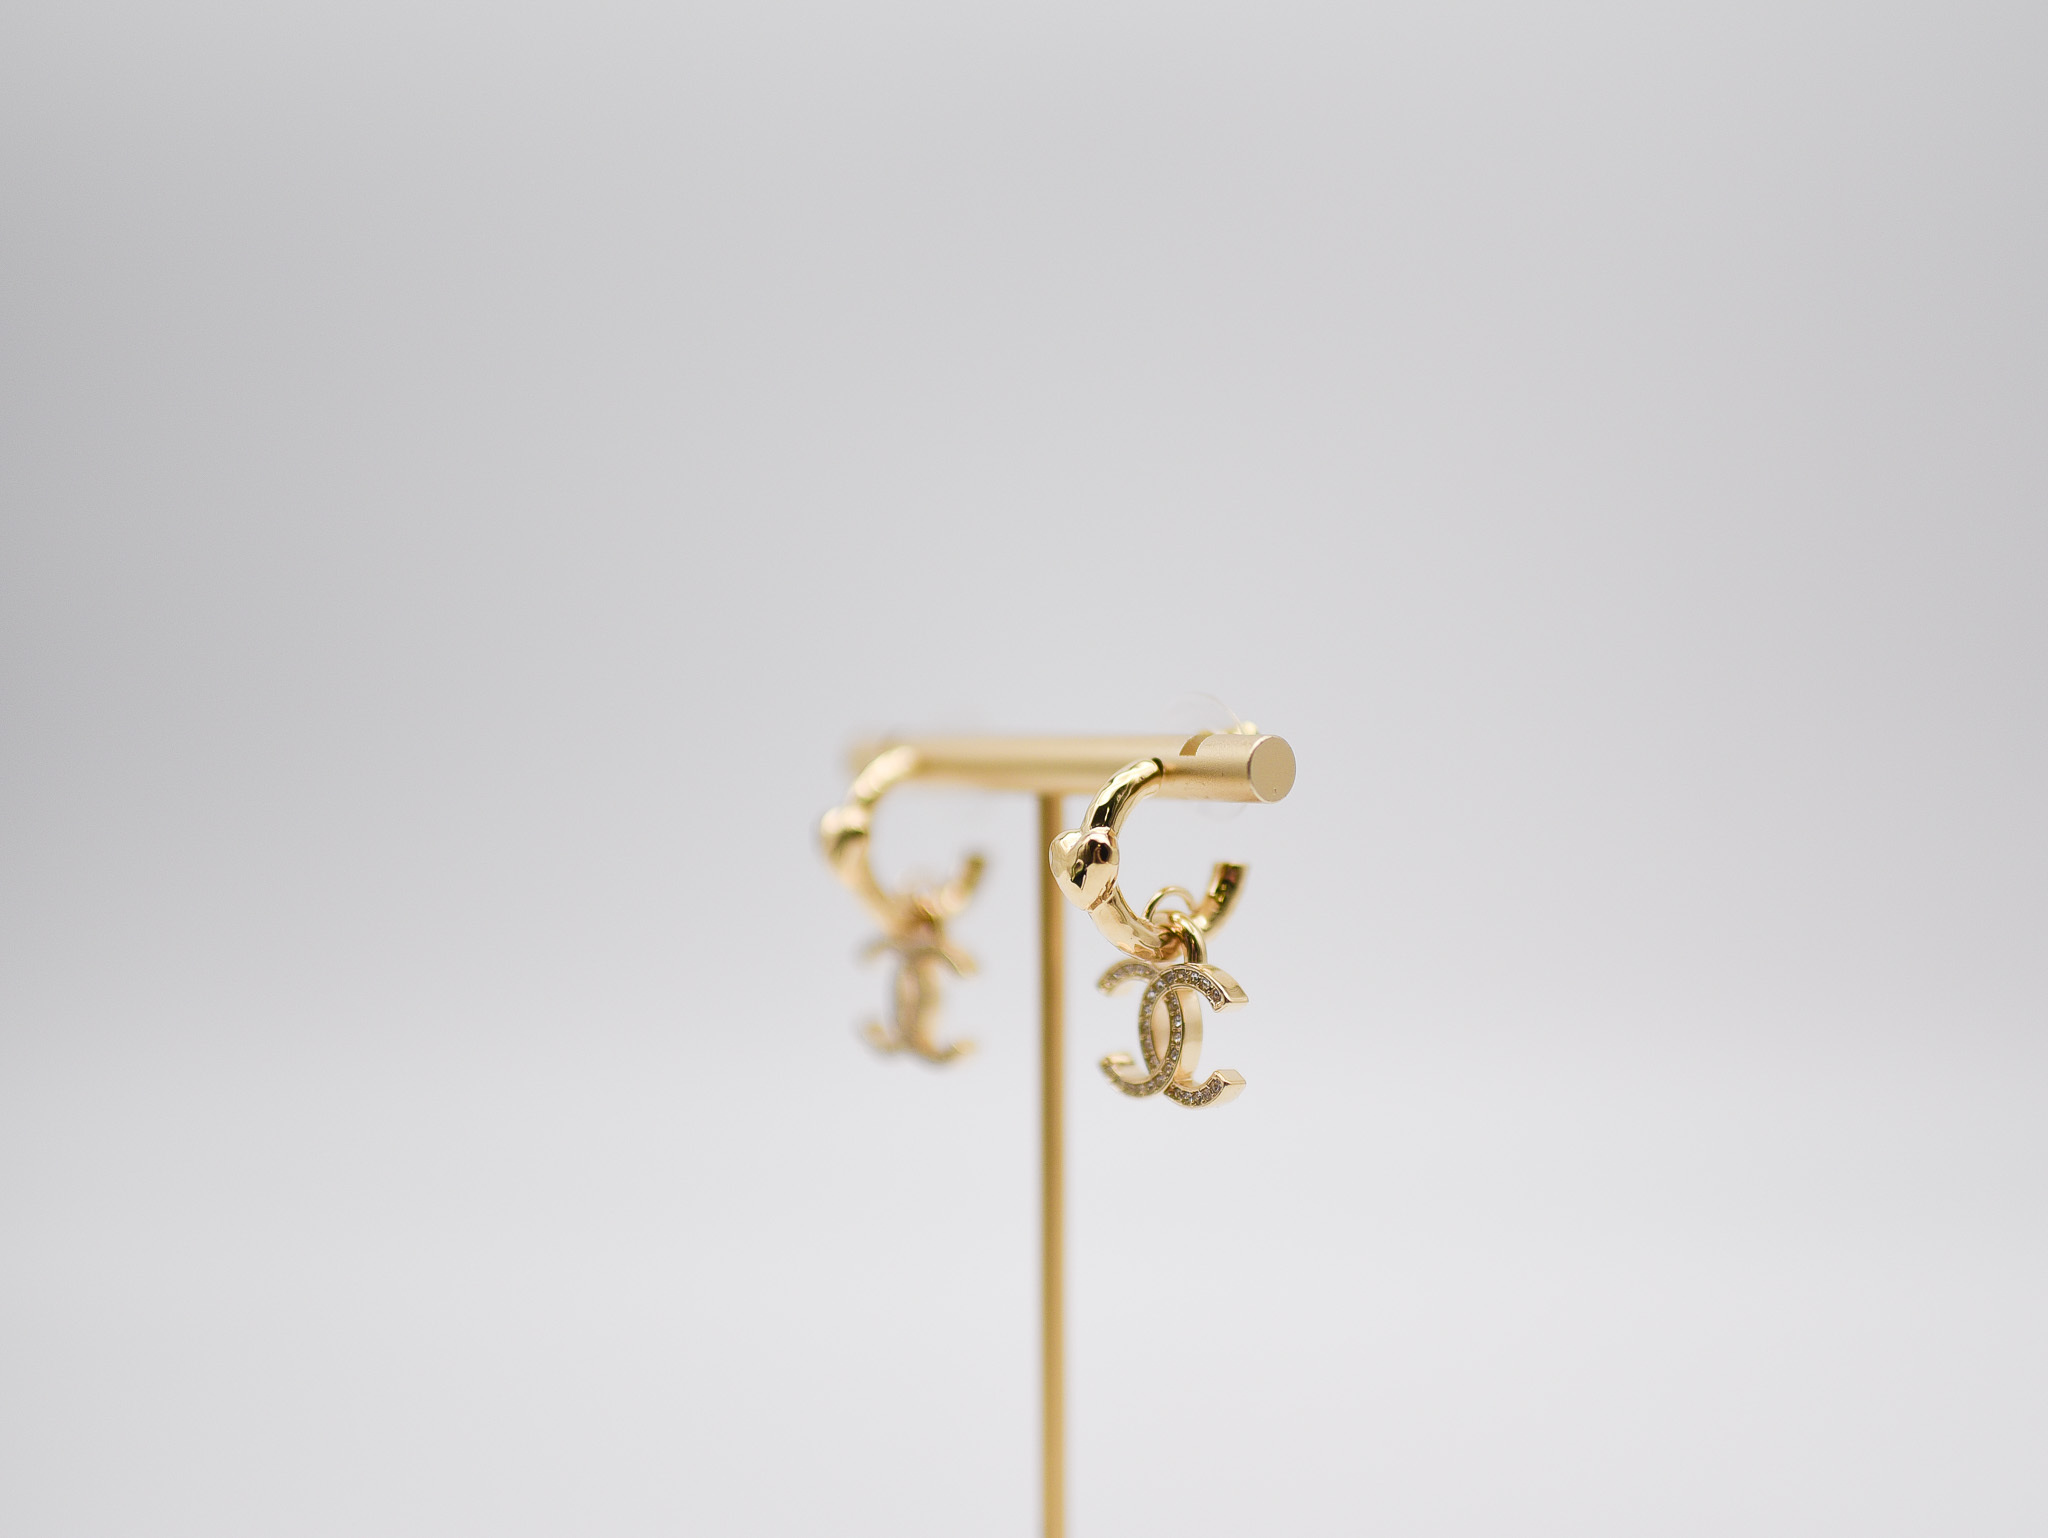 Chanel Earrings CC Drop with Hammered Heart Hoop, Gold Hardware, New in Box  MA001 - Julia Rose Boston